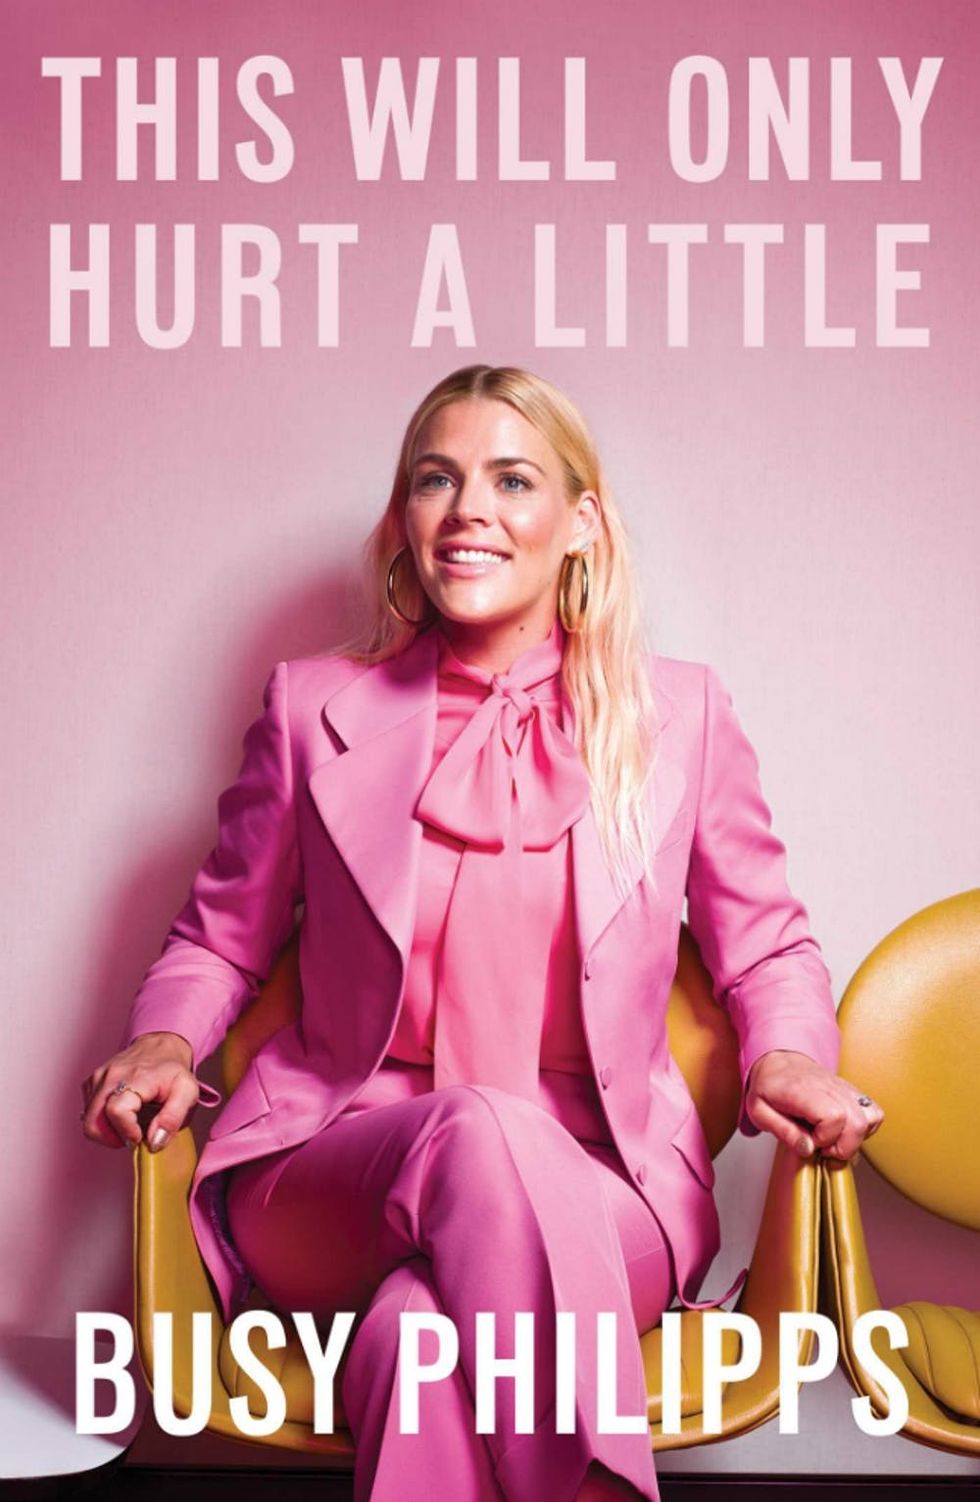 Busy Philipps book cover This Will Only Hurt A Little